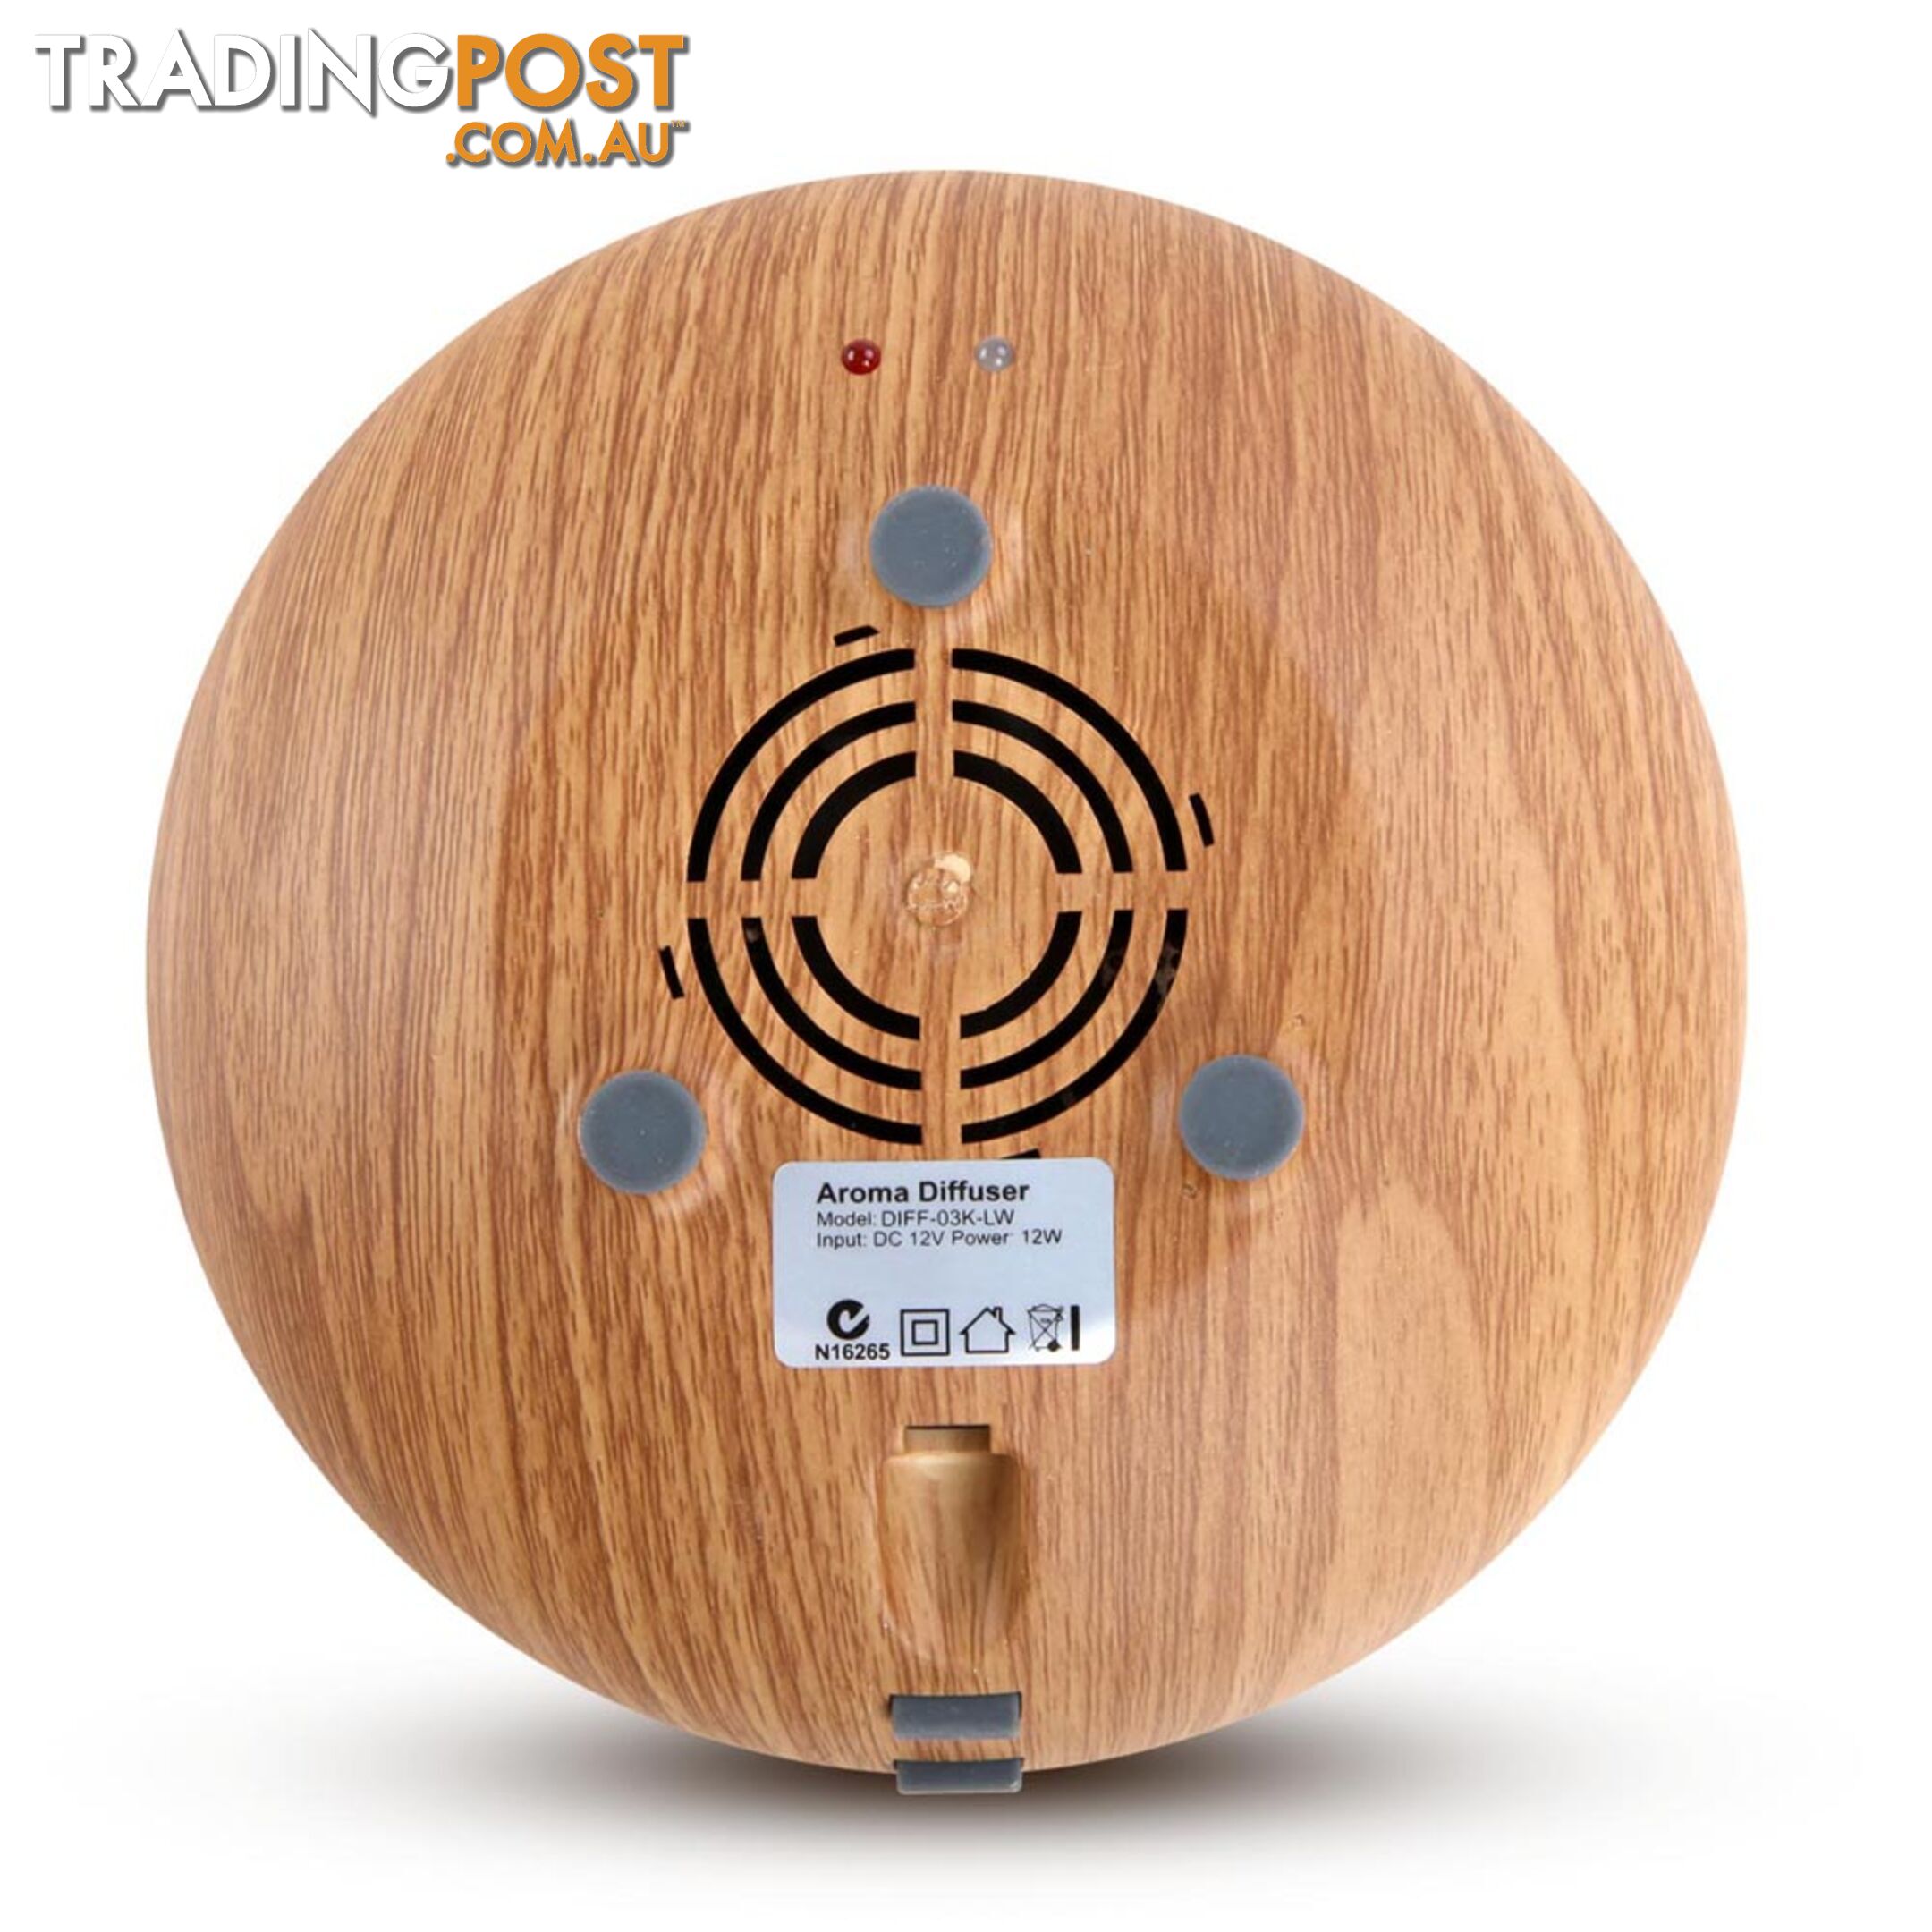 LED Aromatherapy Diffuser Aroma Essential Oil Burner Ultrasonic Air Humidifier